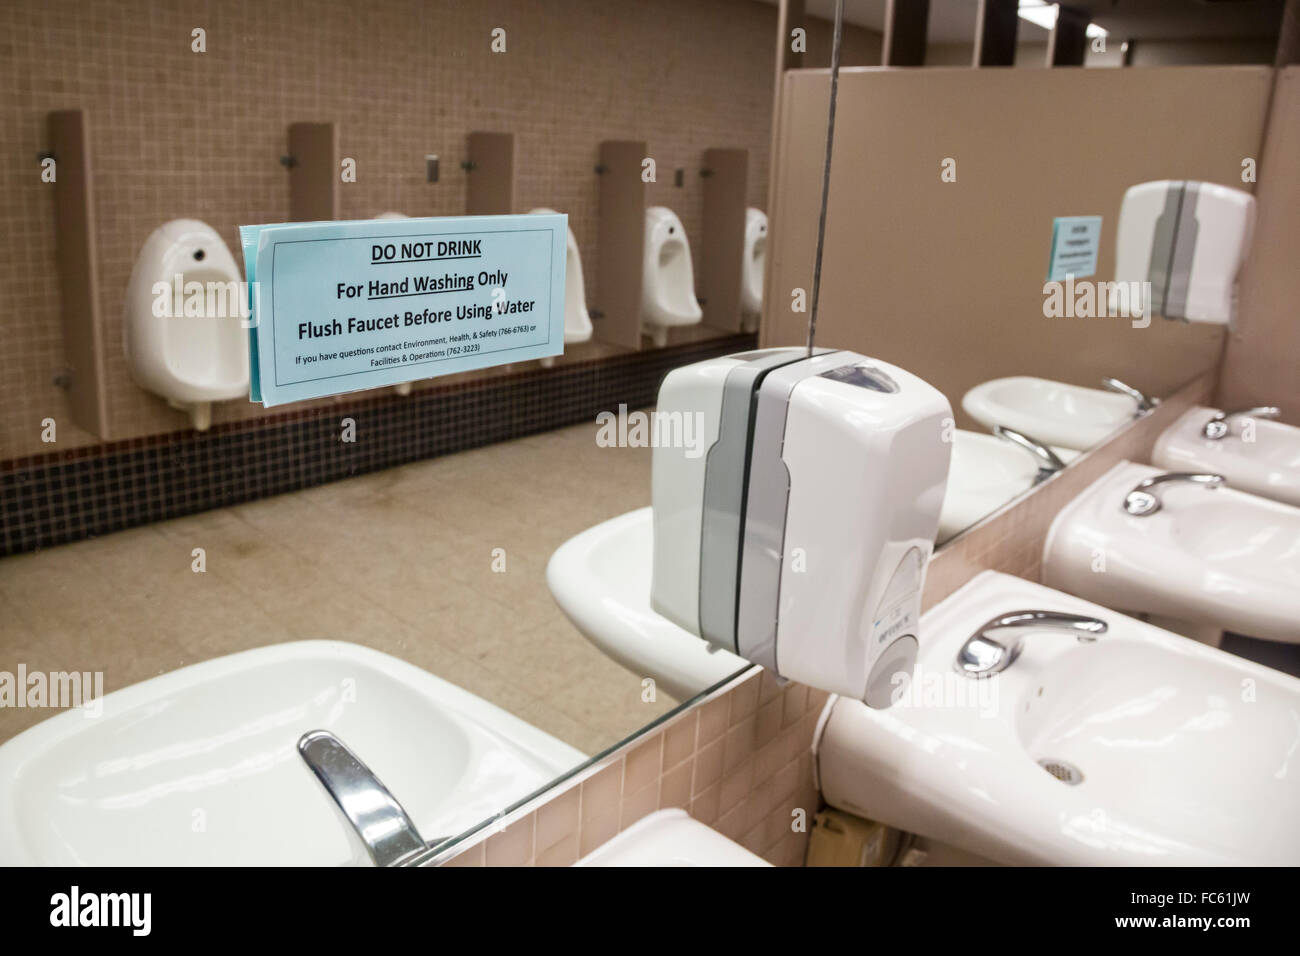 Flint, Michigan - A sign on the mirror in a men's restroom at the University of Michigan-Flint warns against drinking the water. Stock Photo